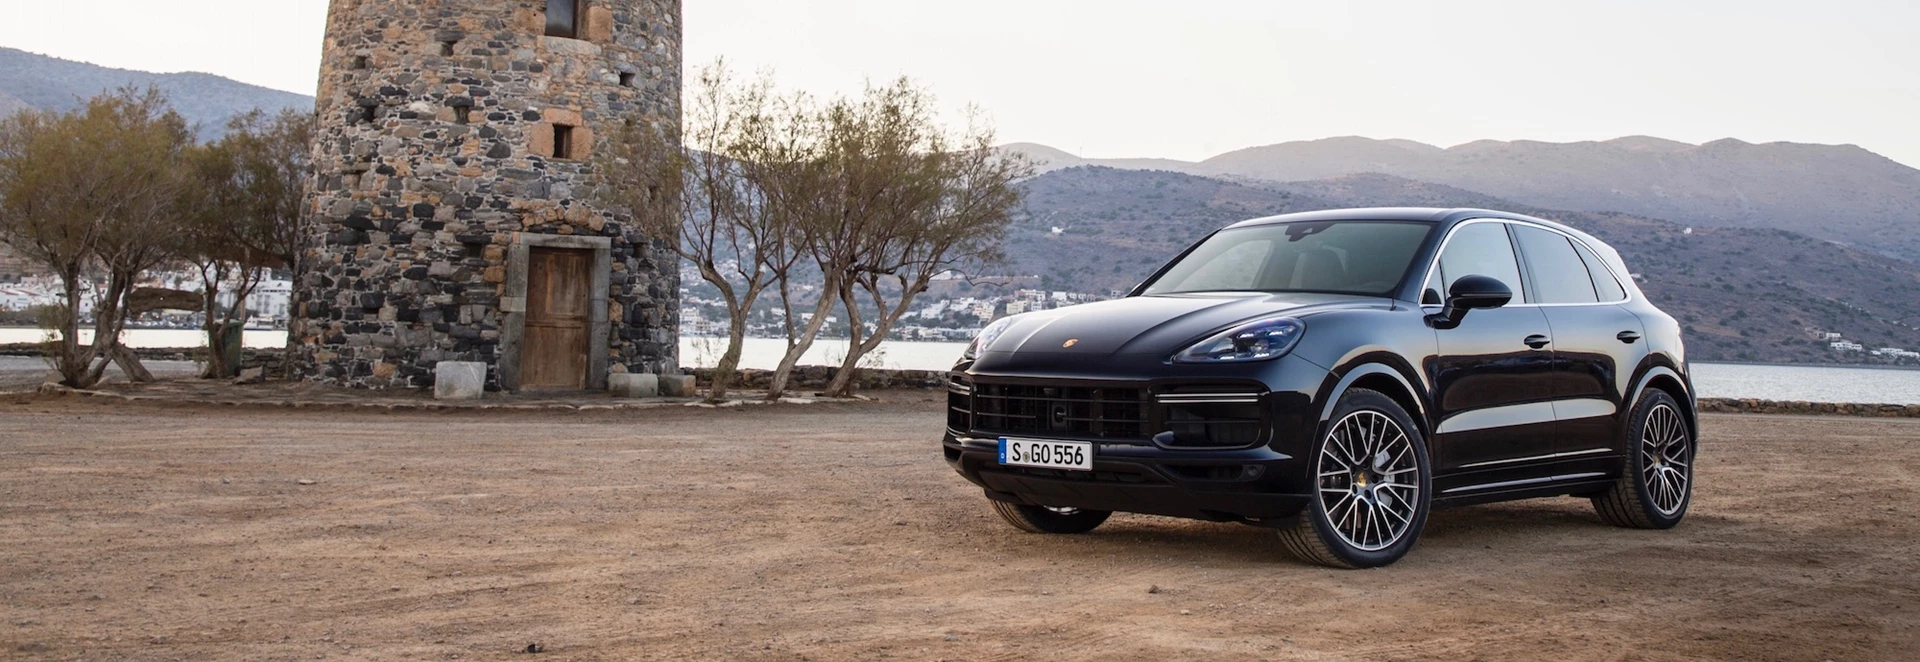 Porsche to drop diesel engines from its line-up